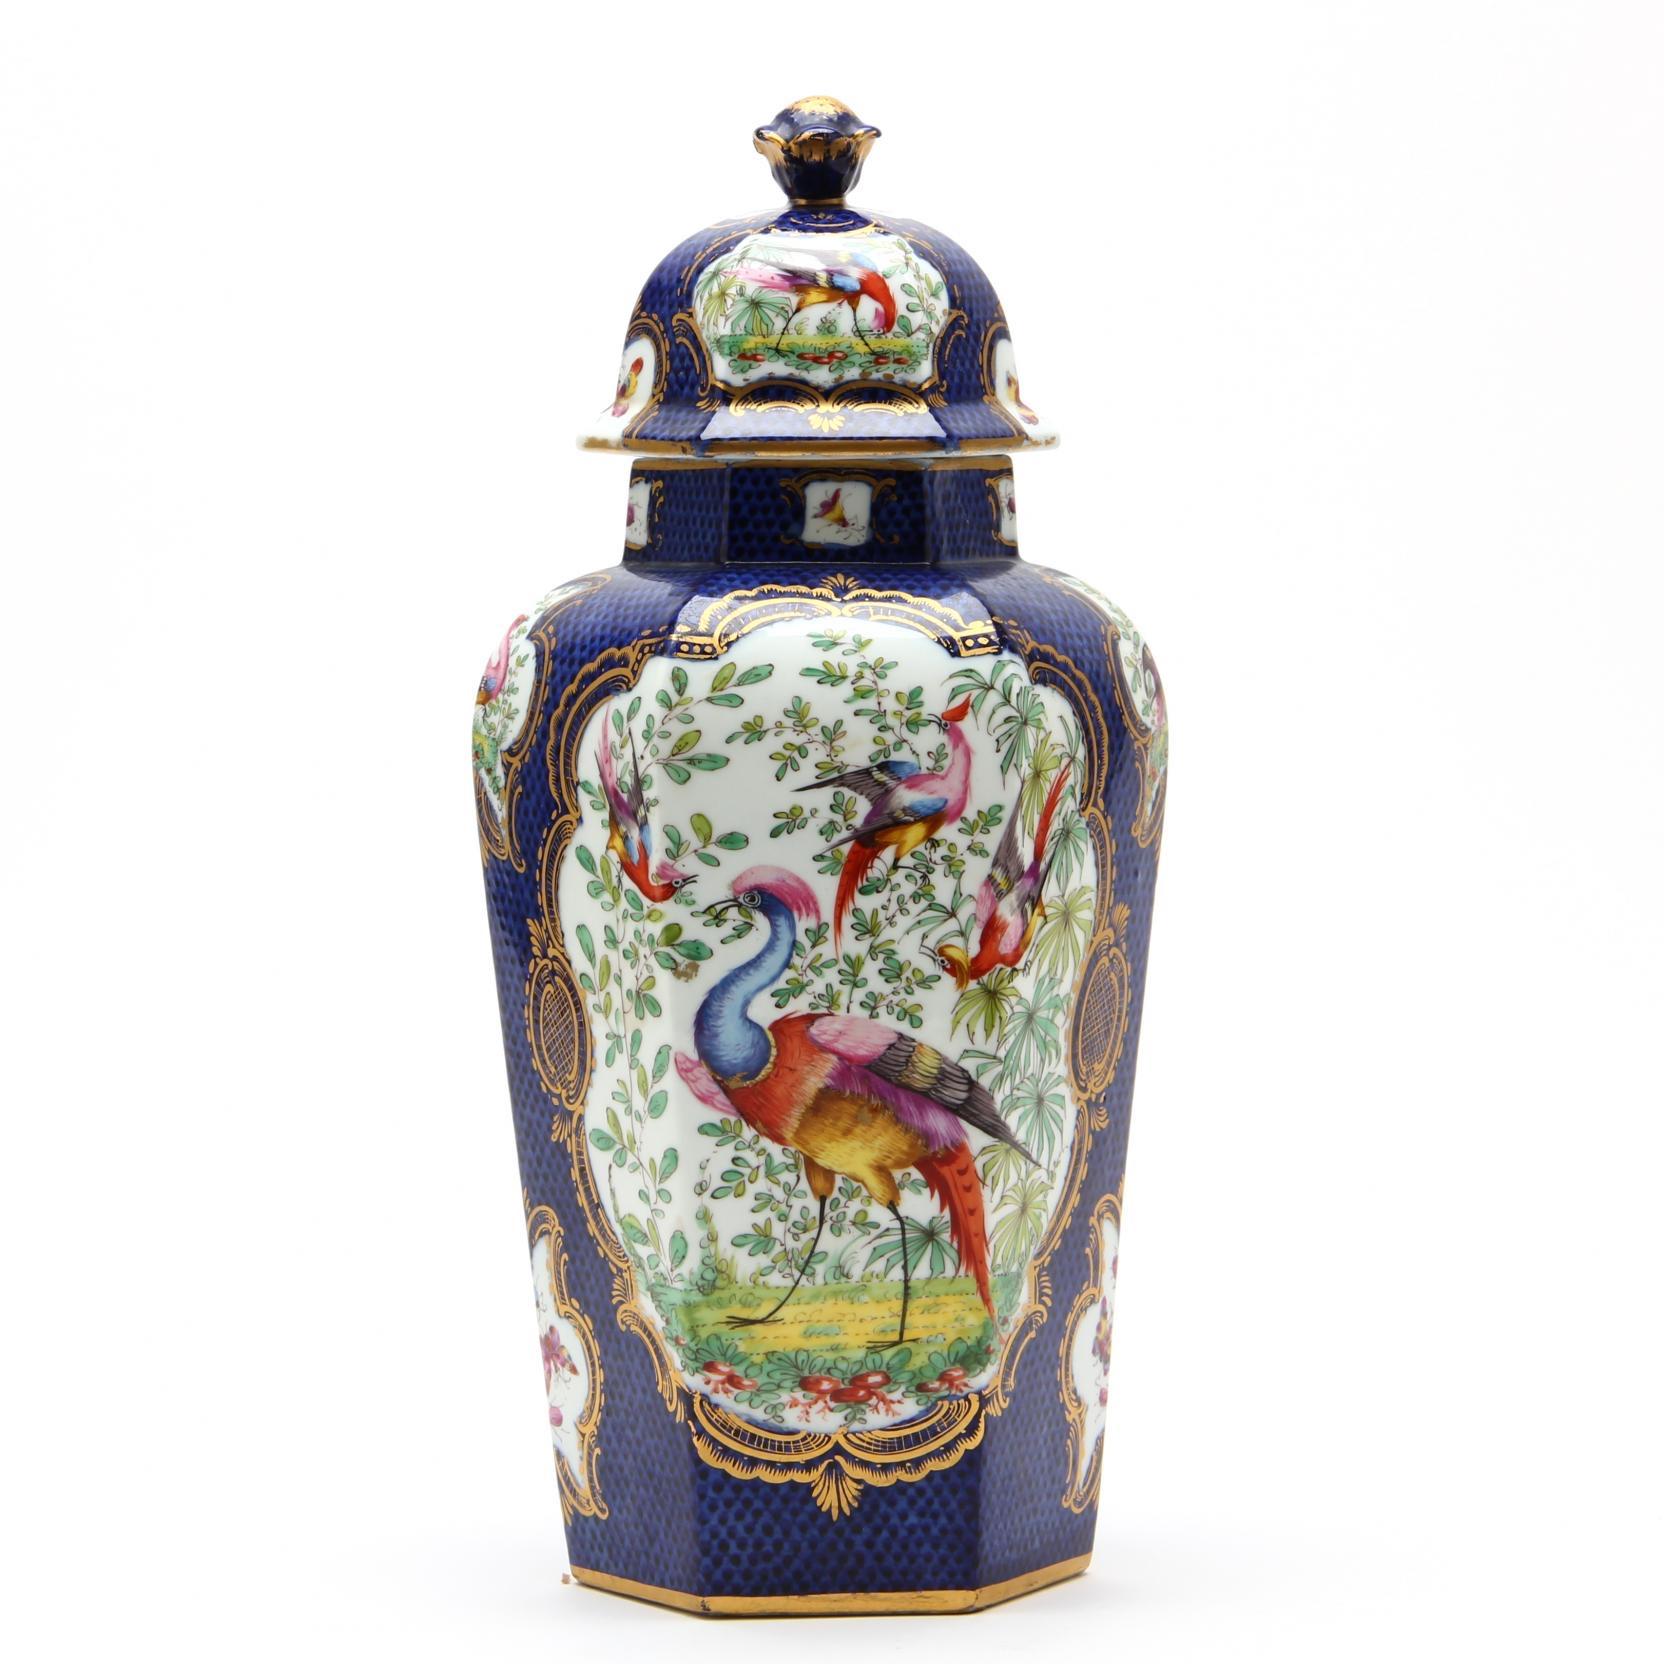 A magnificent English hexagonal porcelain covered jar, in the Worcester porcelain pattern which originated in the 1760’s: scale patterned cobalt blue glazed ground, punctuated by gilt and polychrome decorated cartouches framed in finely gilded